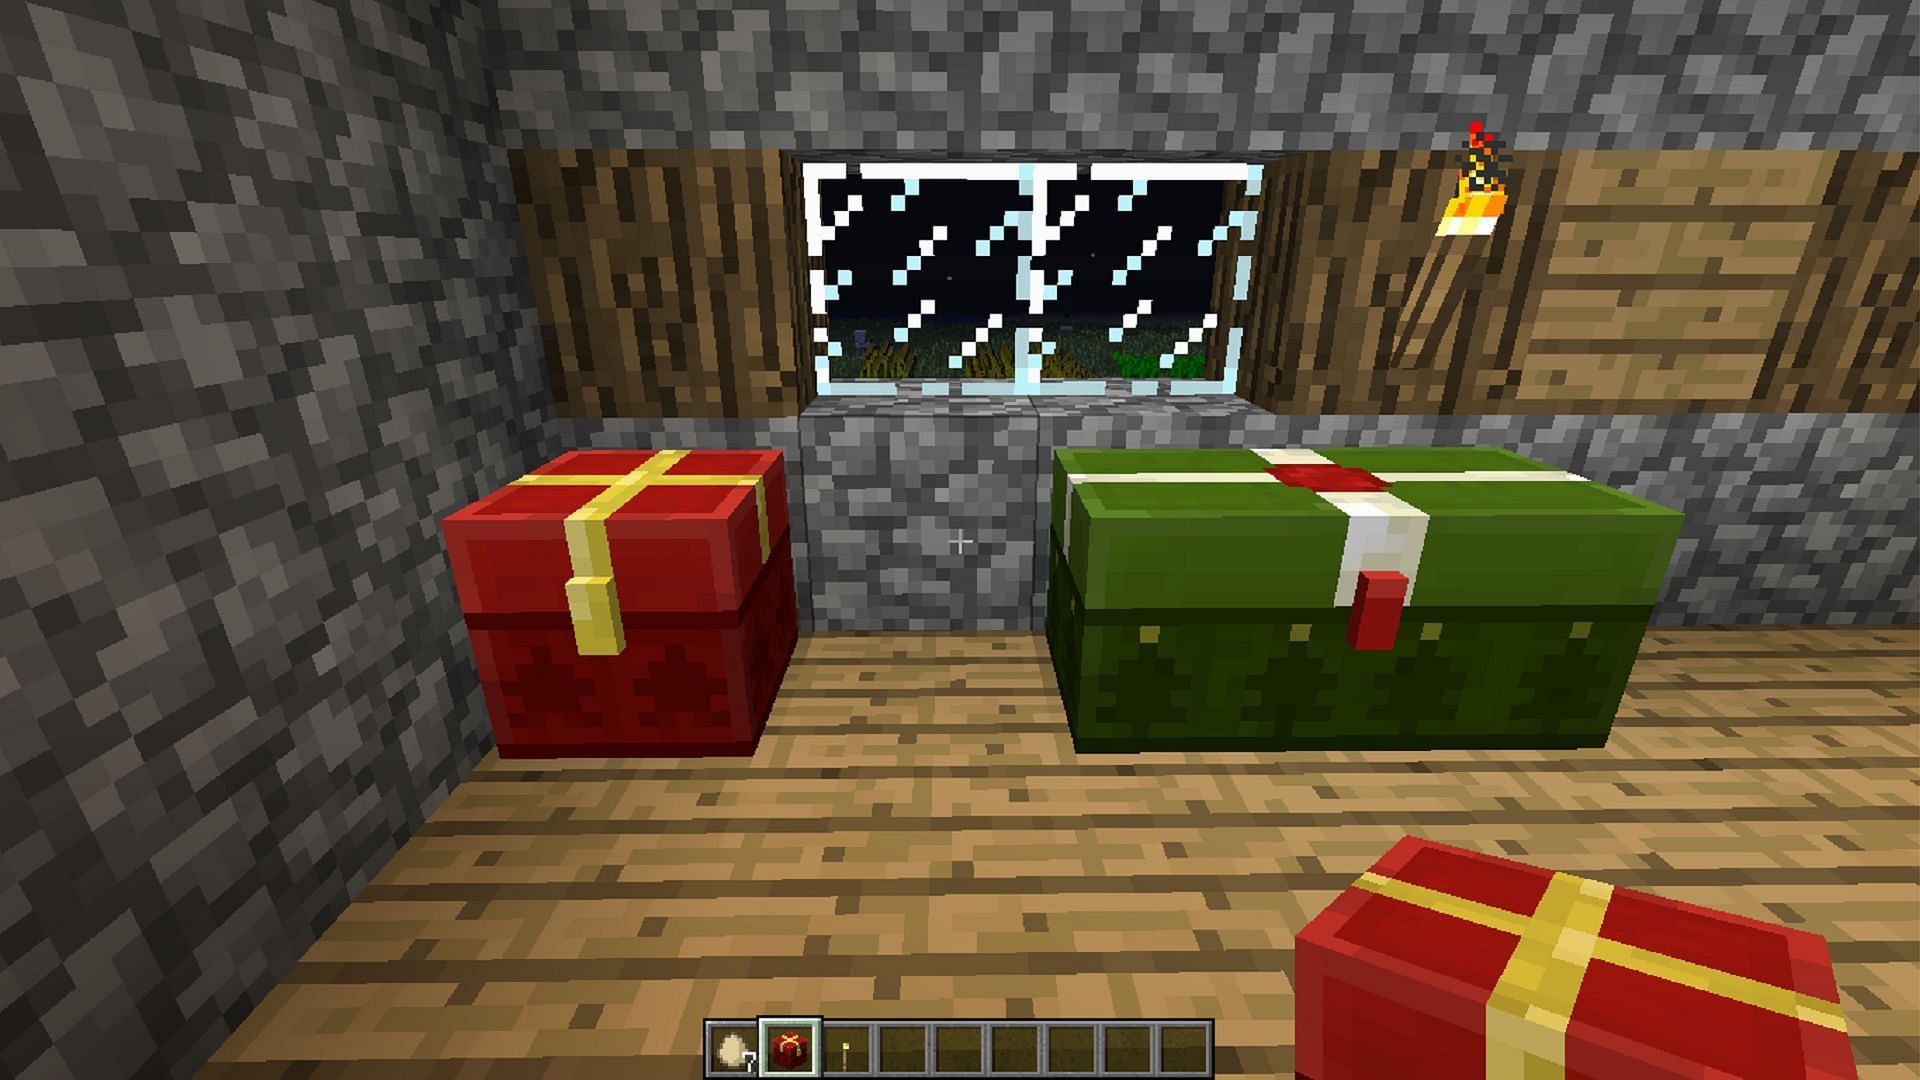 A Minecraft fan recently shared a major issue with Christmas chest textures.